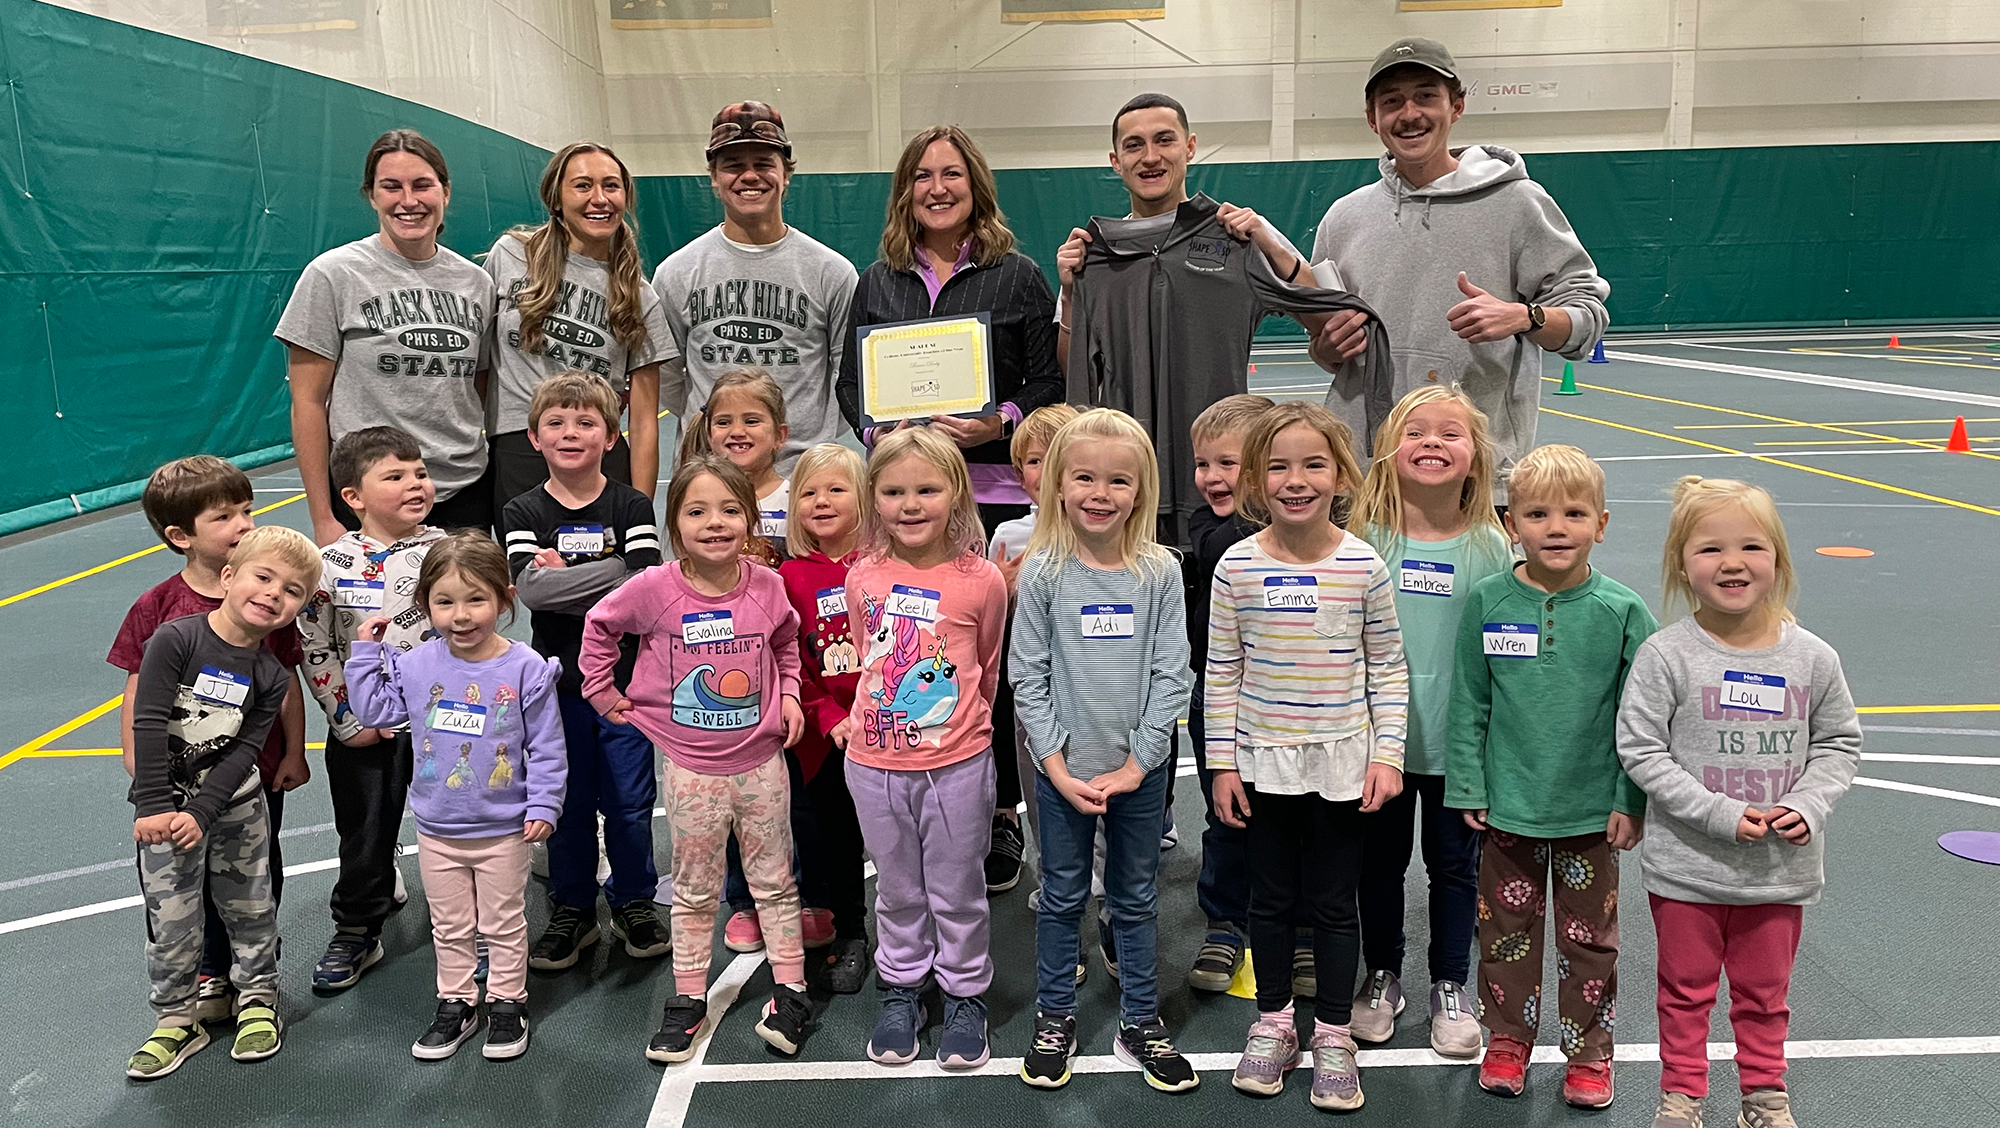 Dr. Breon Darby holding award with BHSU Students and Preschool class.